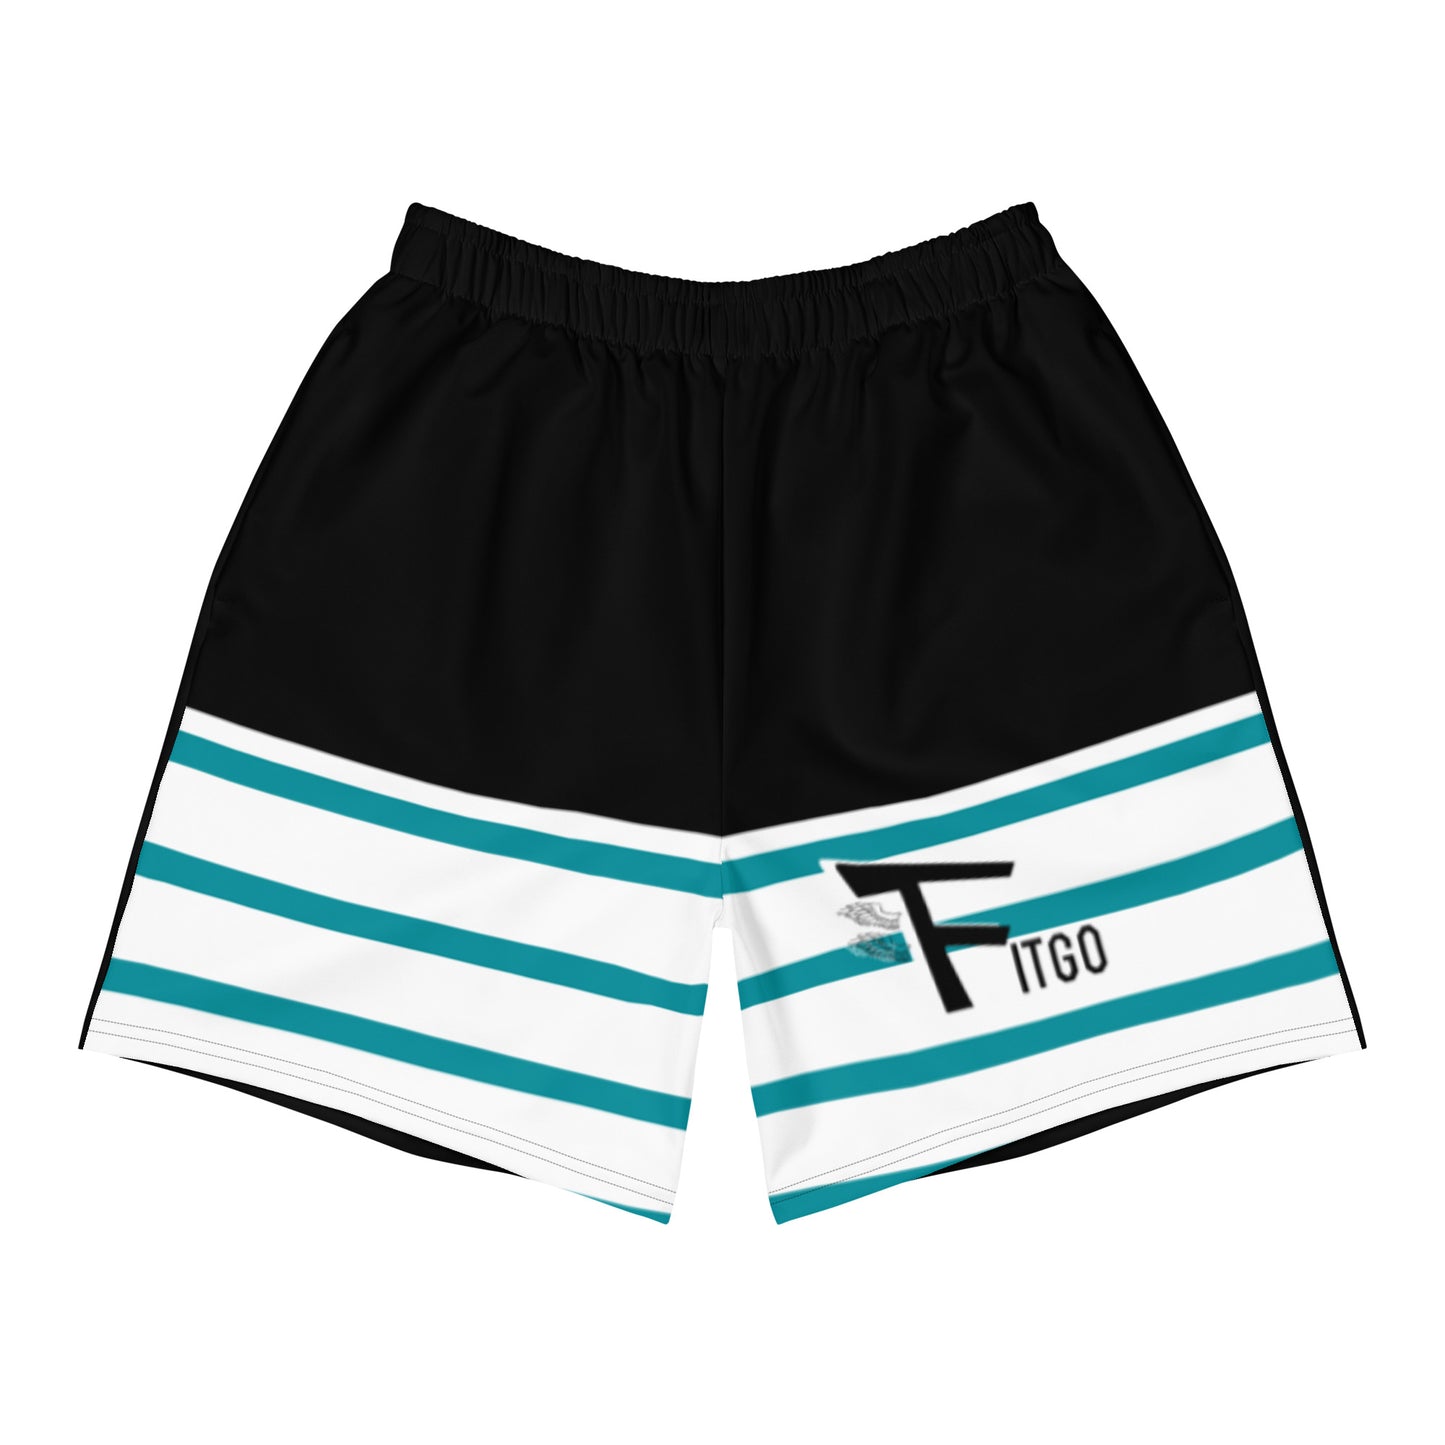 Men's Fitgo Defined Athletic Shorts